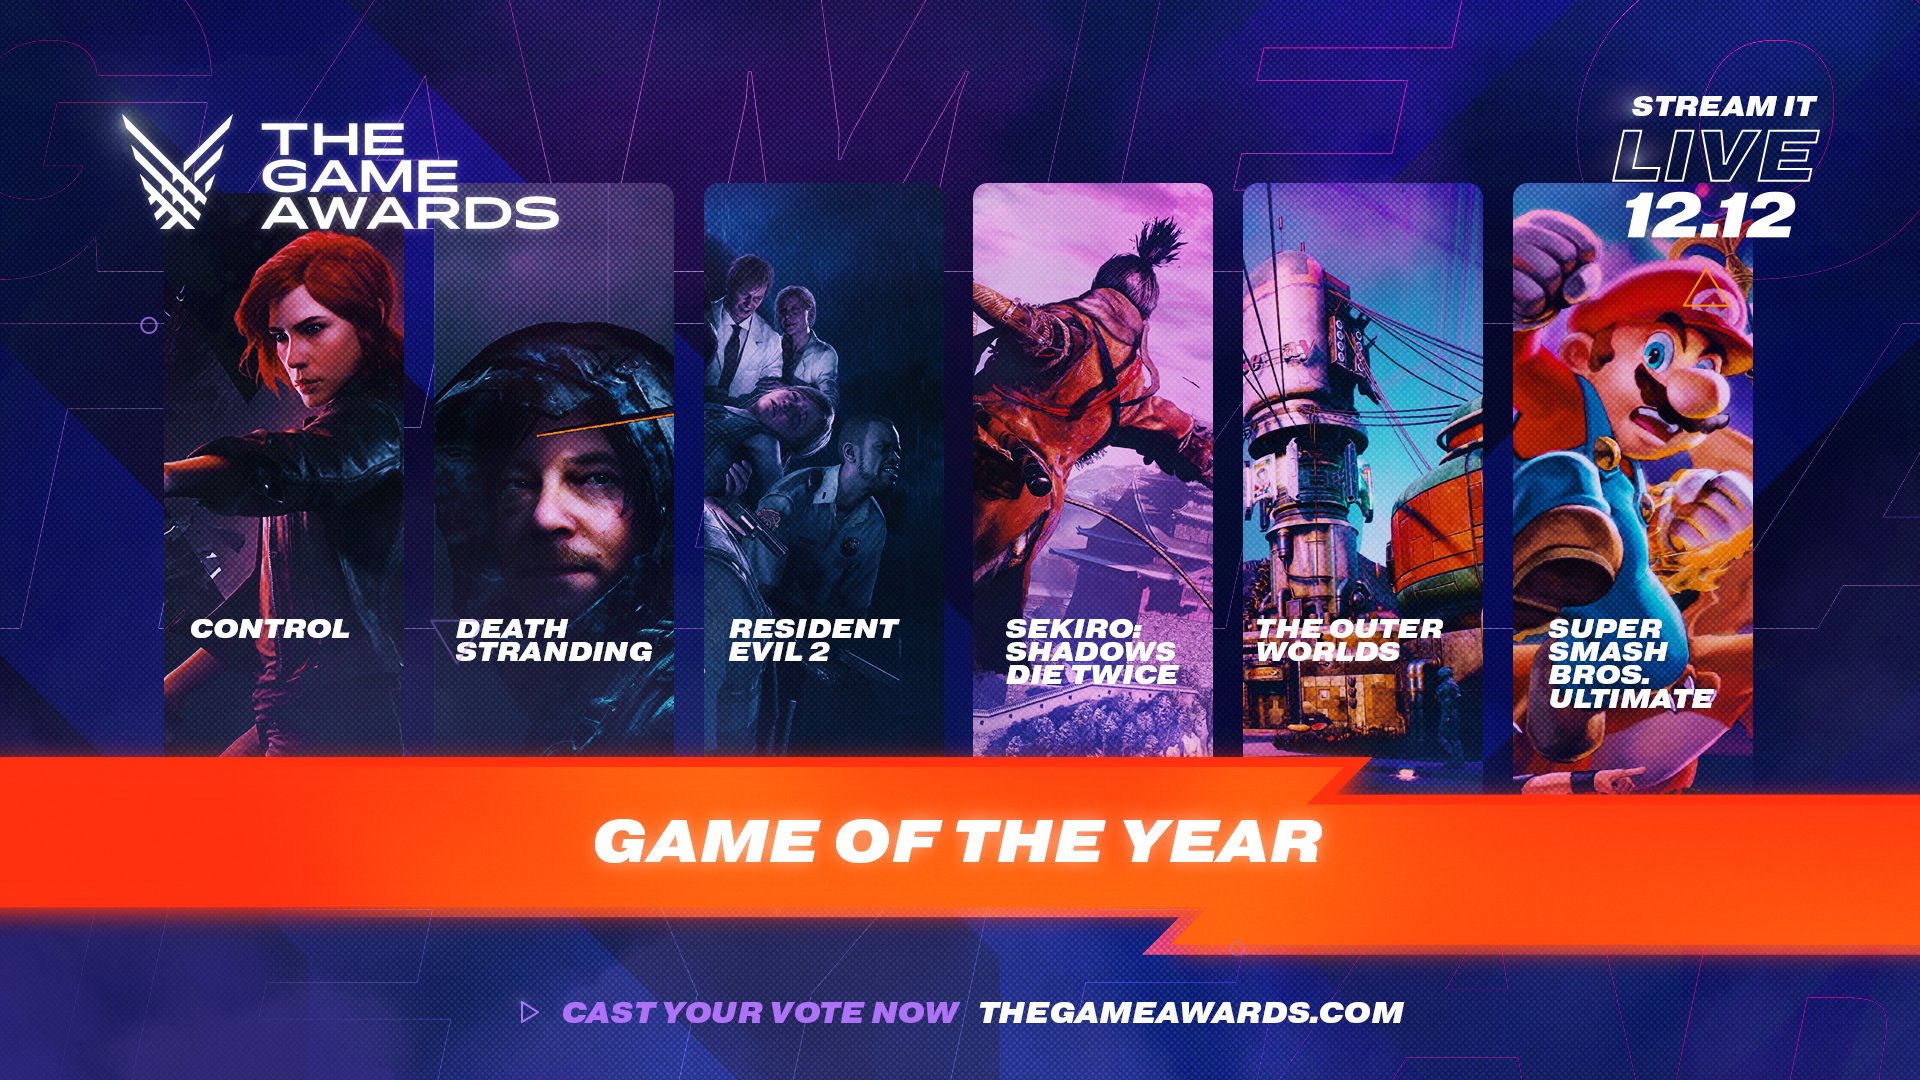 The Game Awards on X: Here are your six nominees for GAME OF THE